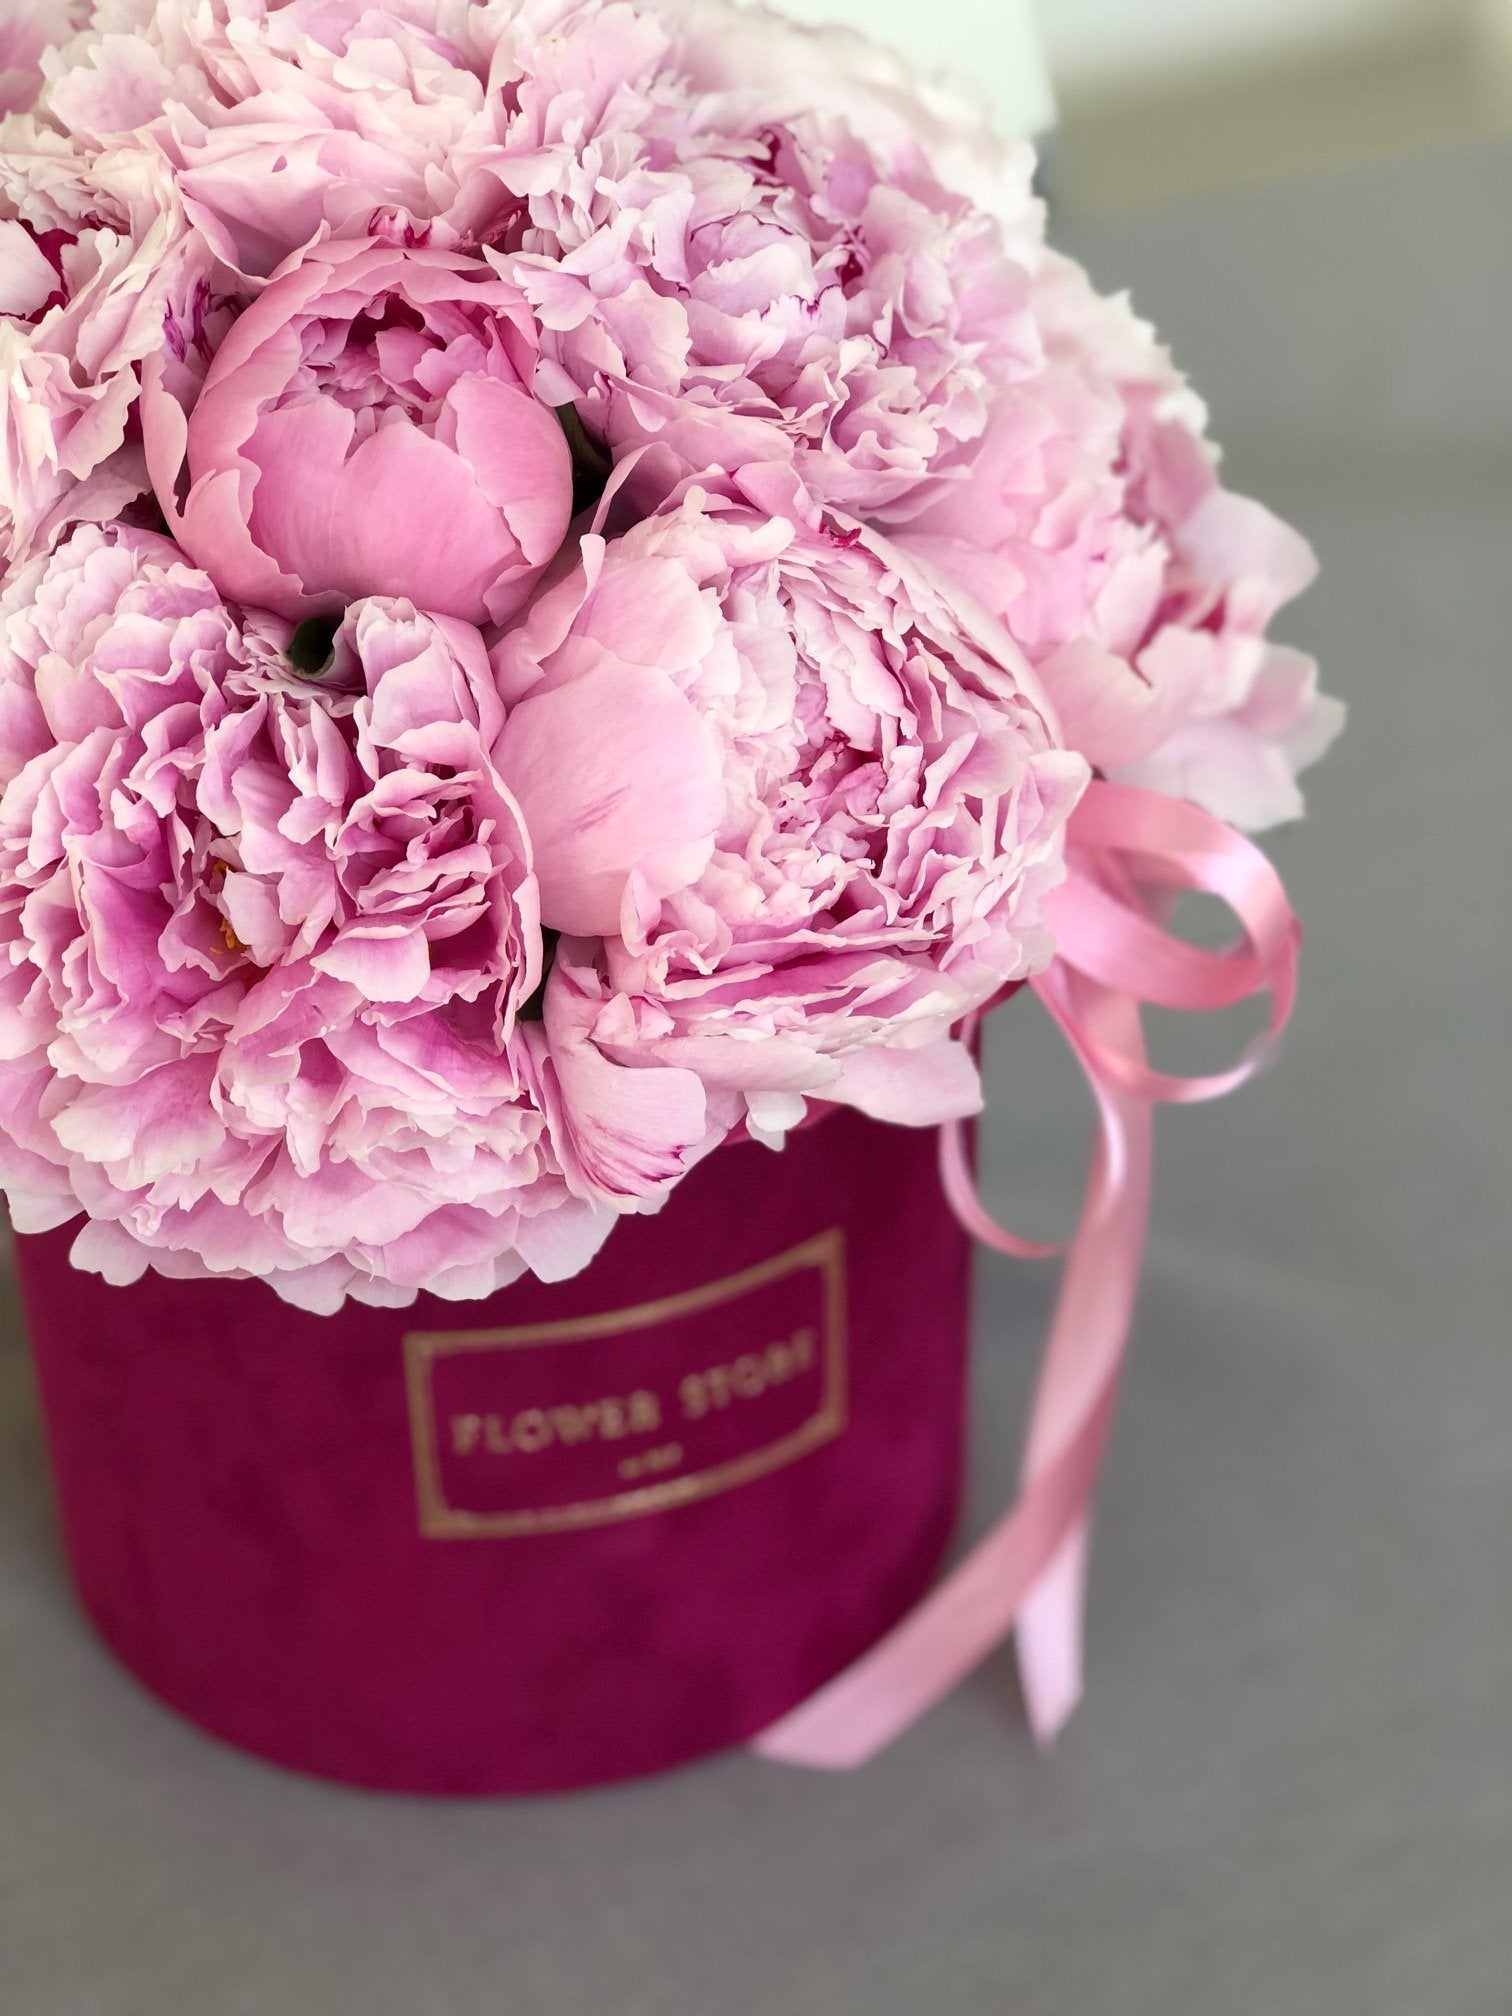 Fuchsia flocked flowerbox with peonies - live flowers with delivery